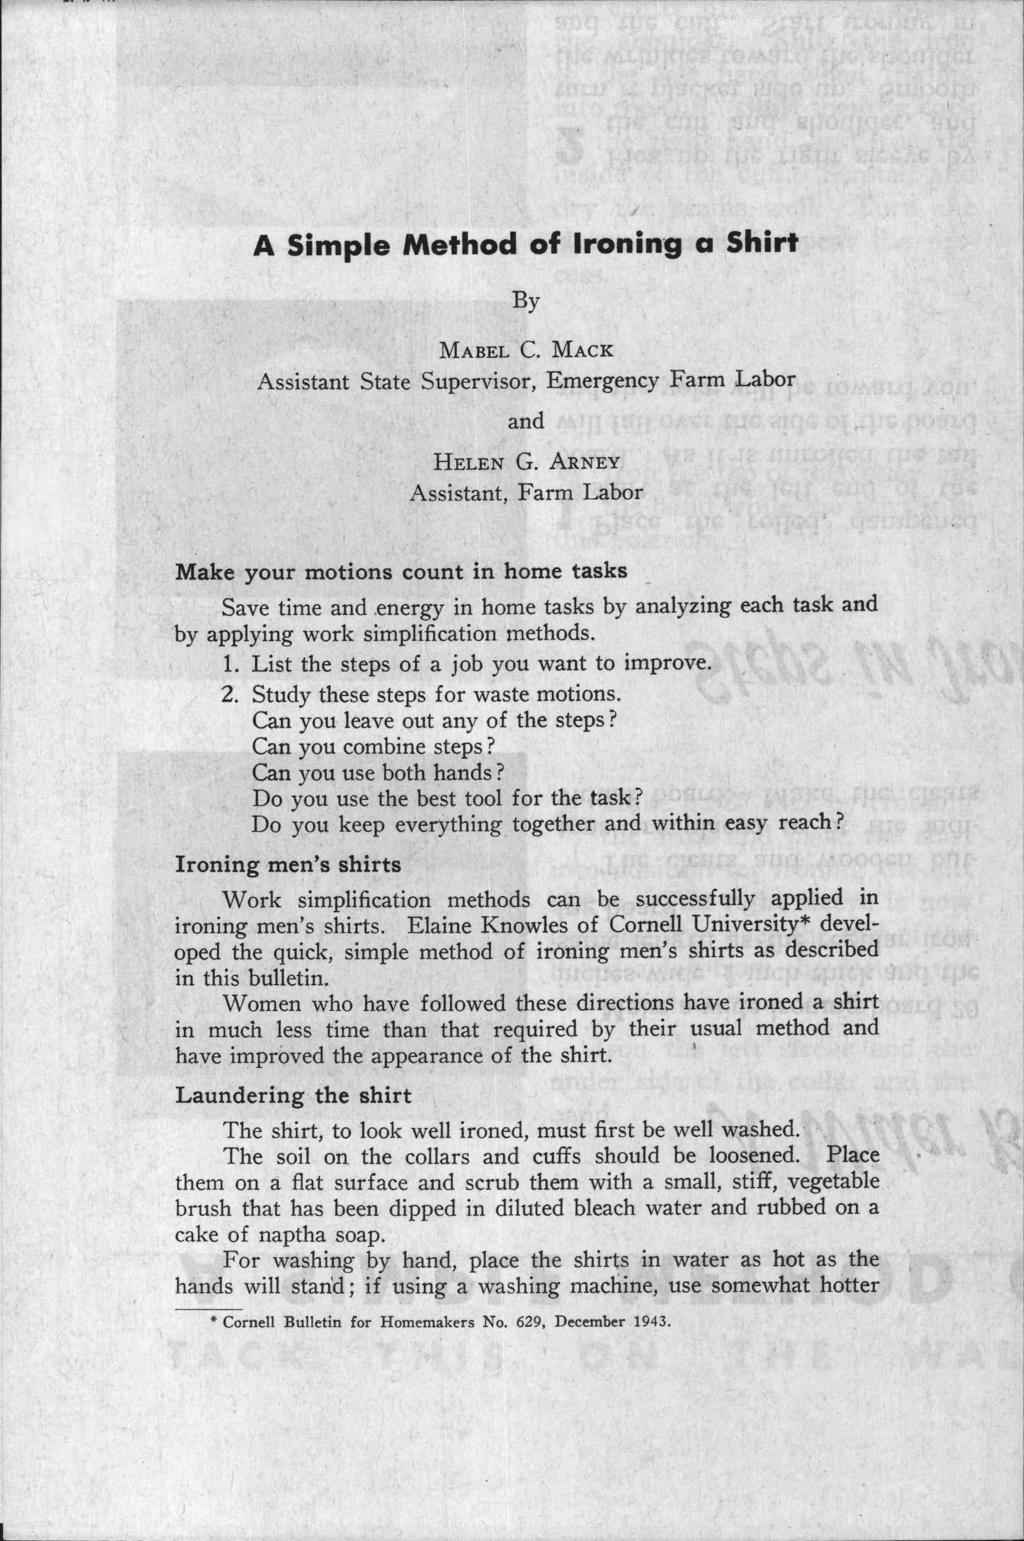 A Simple Method of Ironing a Shirt By MABEL C. MACK Assistant State Supervisor, Emergency Farm Labor and HELEN G. ABNEY Assistant, Farm Labor Make your motions count in home tasks Save time and.